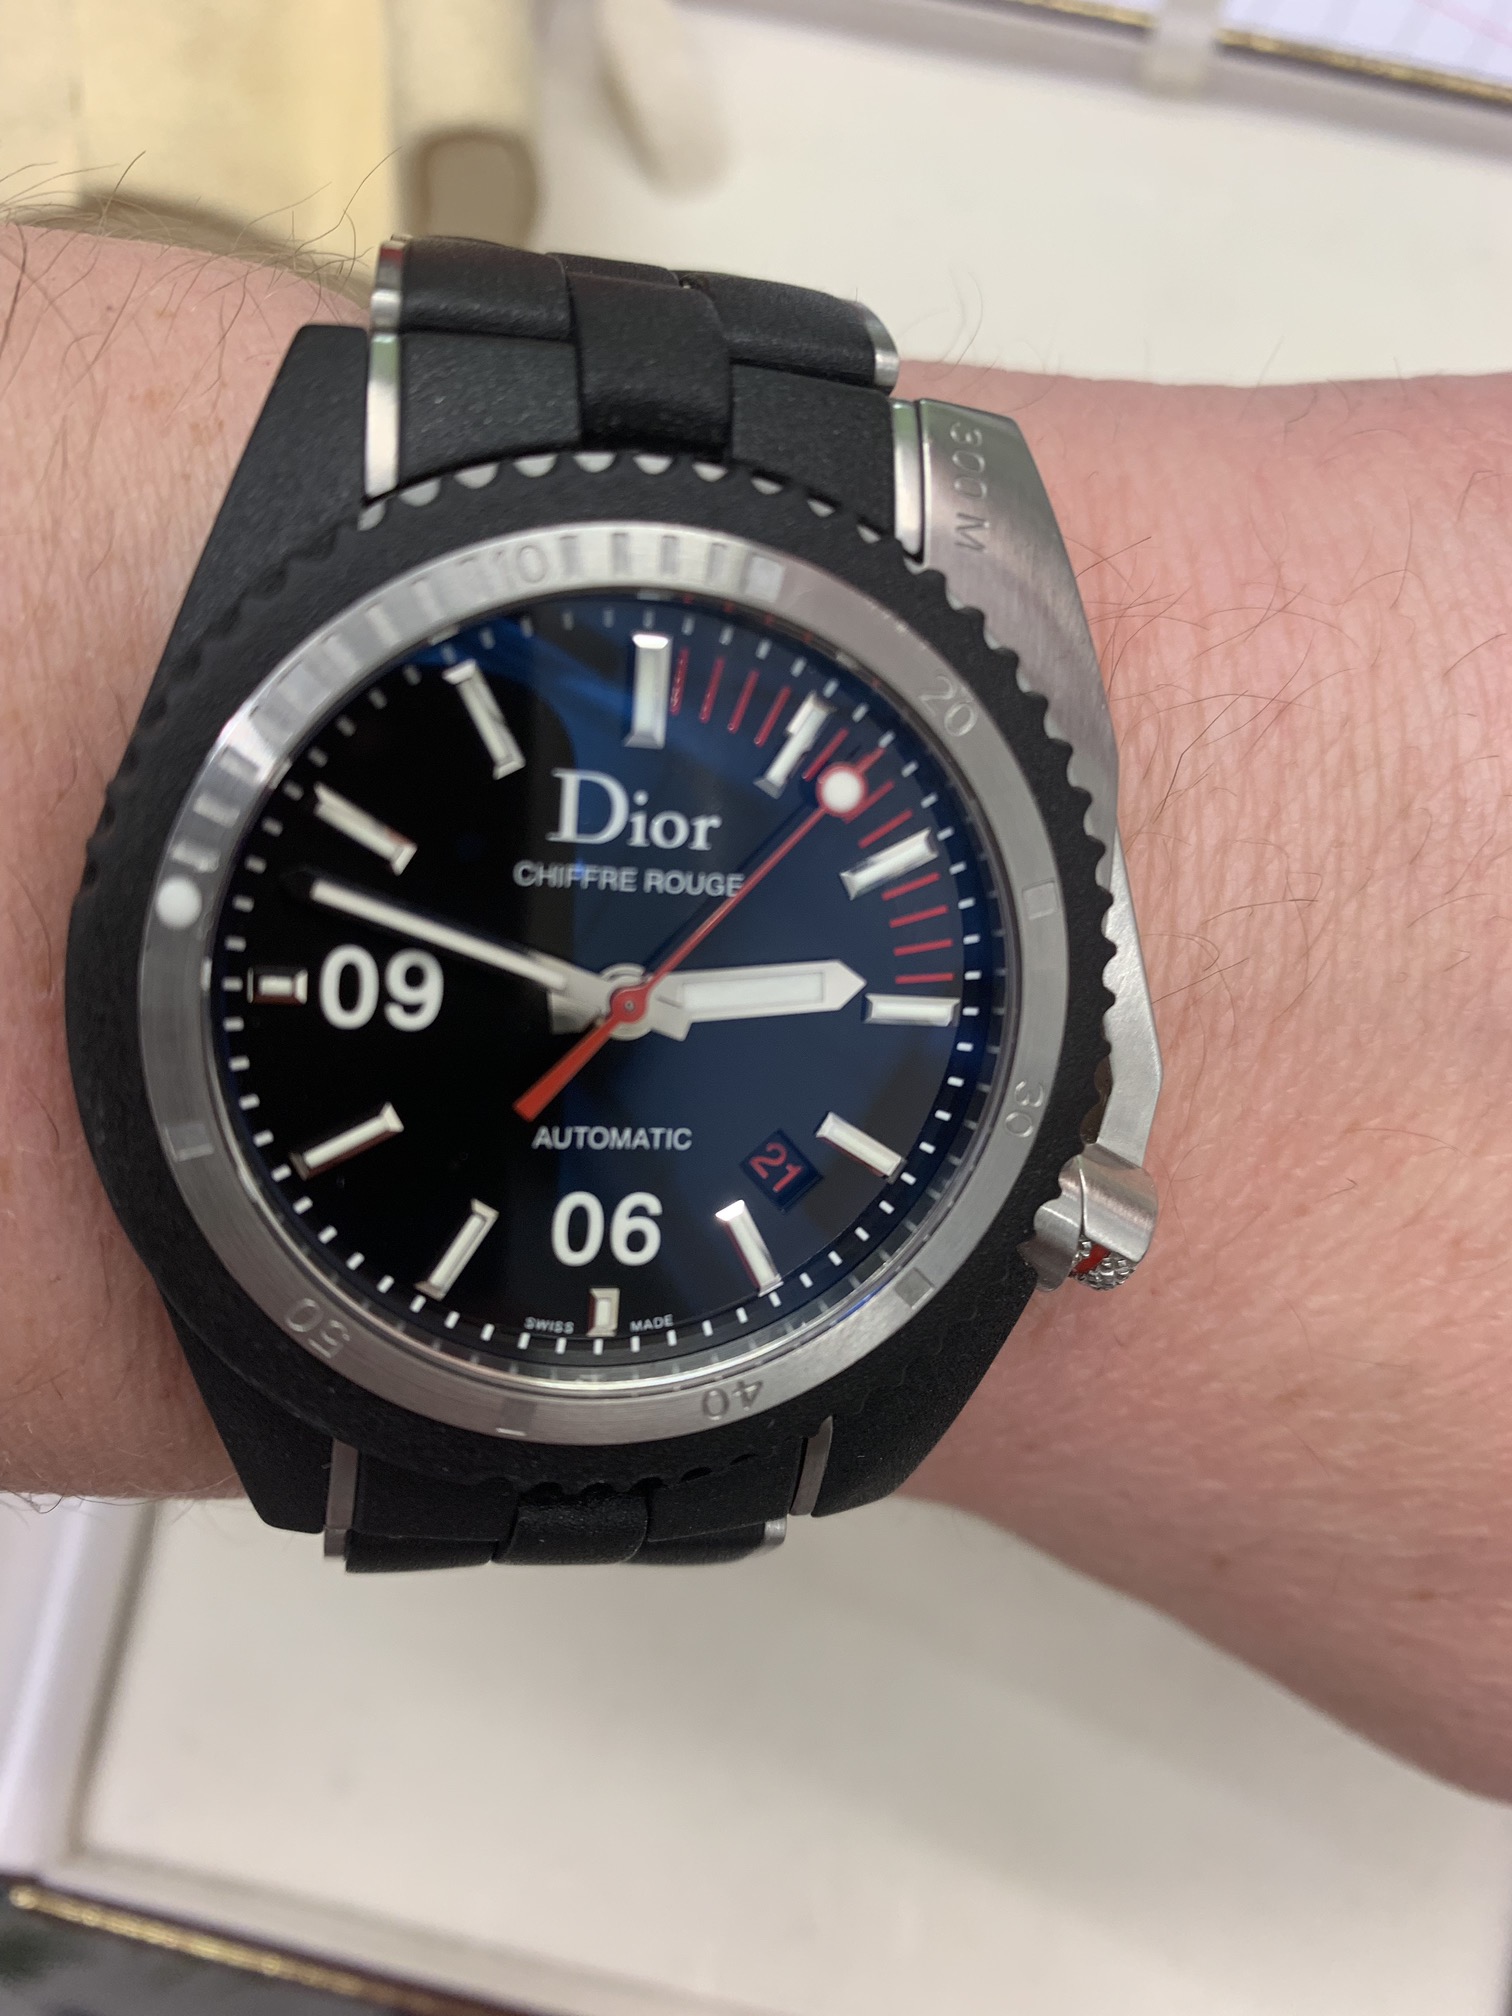 DIOR CHIFFRE ROUGE DIVING WATCH 42mm